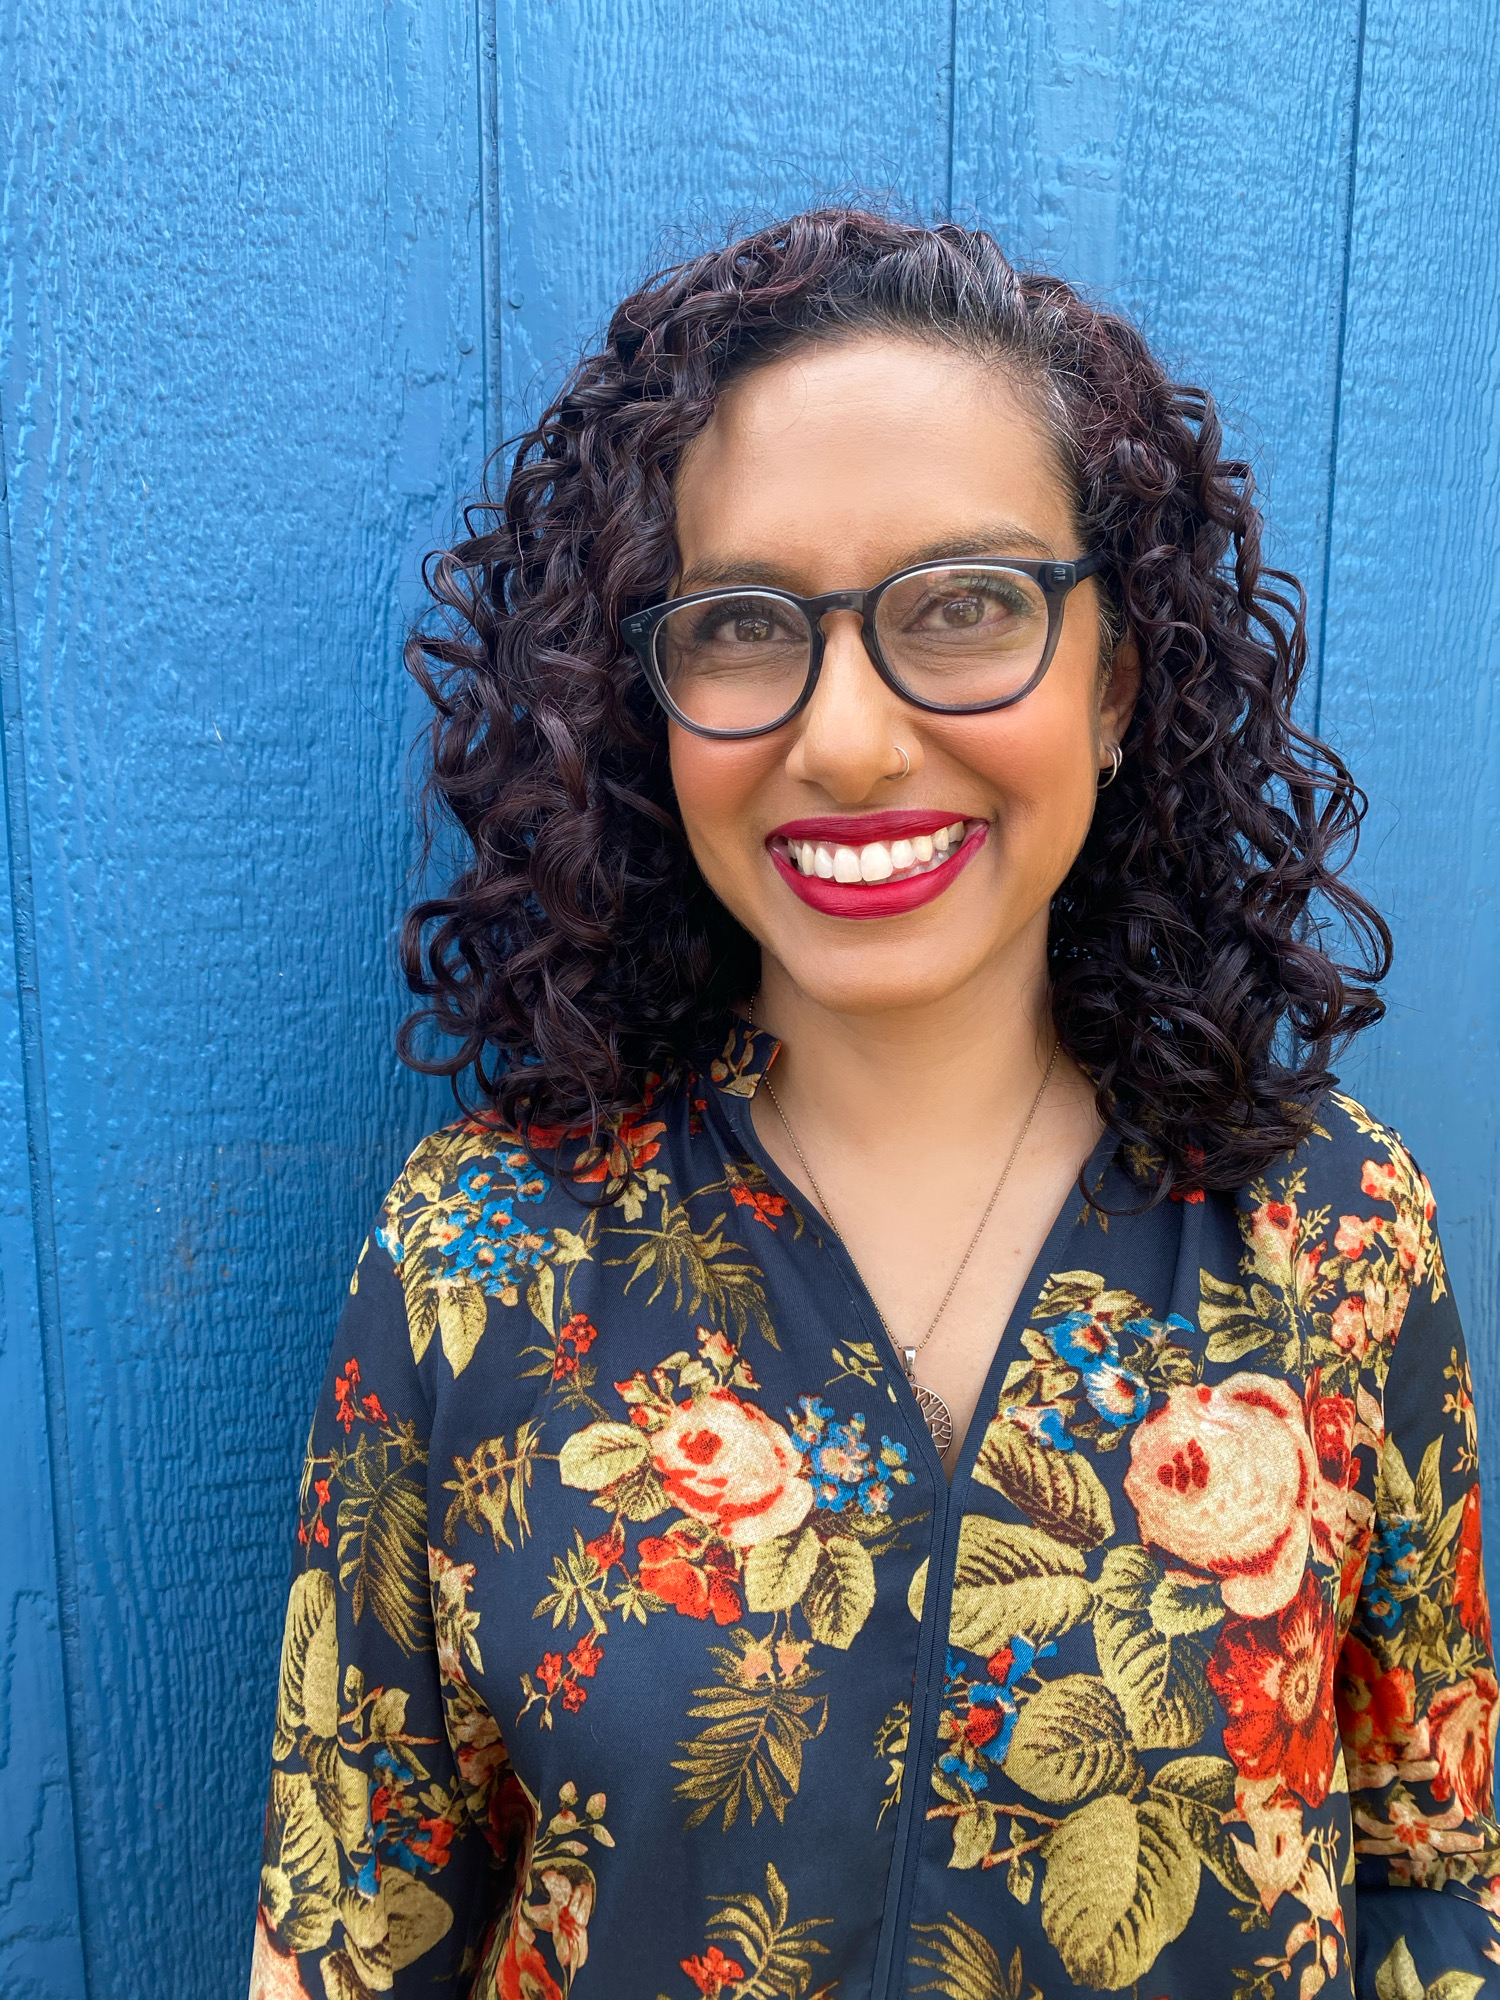 Picture of Farah-- A south Asian woman with black curly hair reaching her shoulders and brown skin. She is wearing a blue shirt with large roses on it, and standing in front of a blue wall. 
